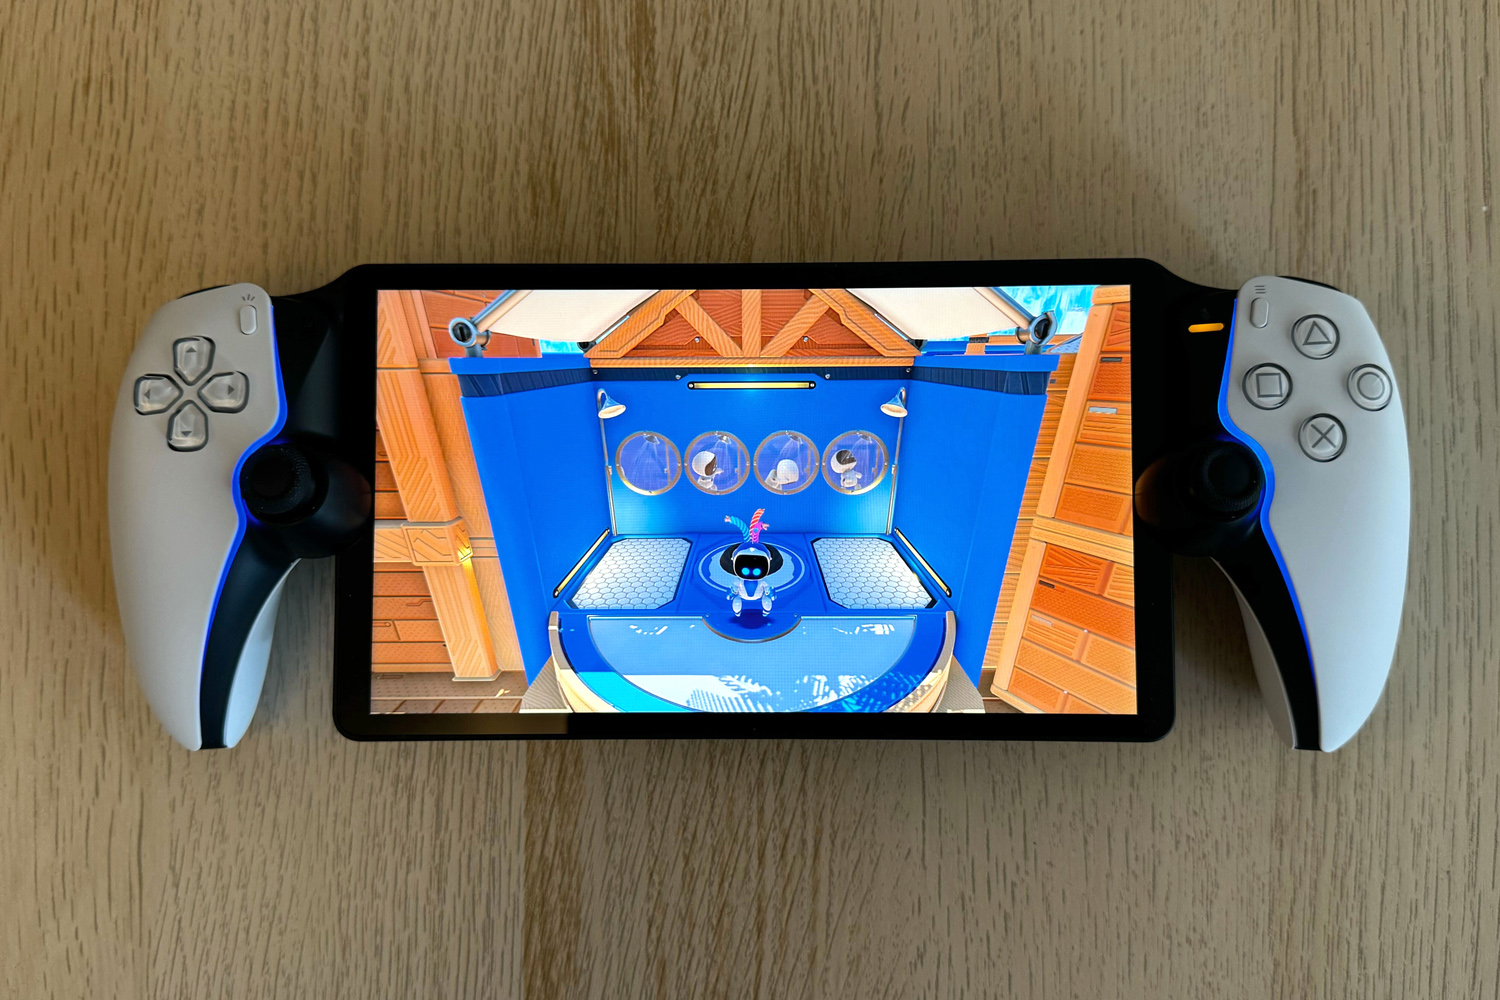 Playstation Portal Review – A True Handheld Accessory